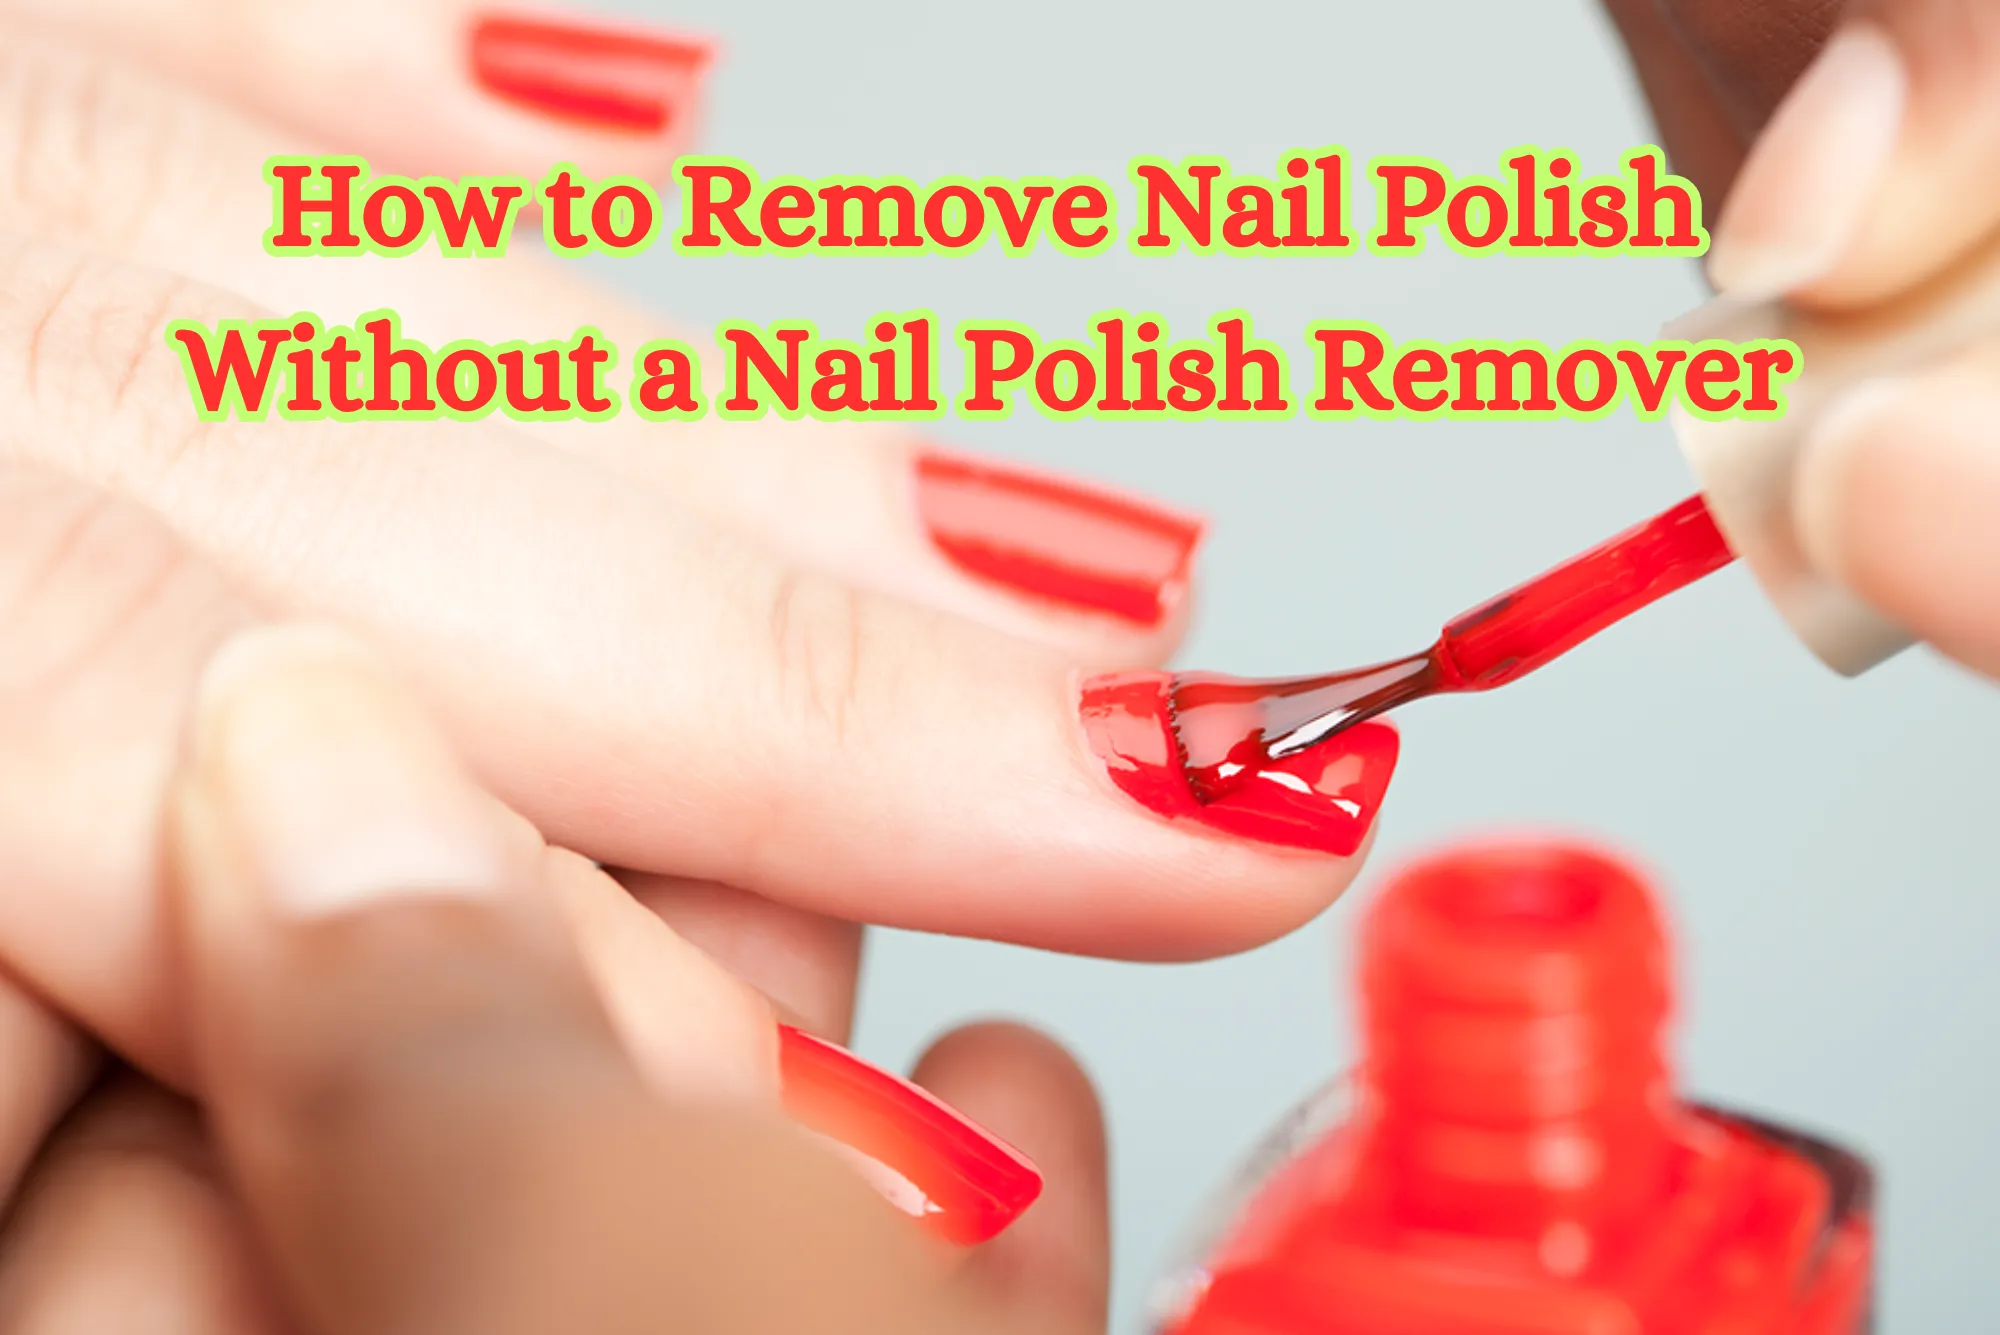 How to Remove Nail Polish Without a Nail Polish Remover